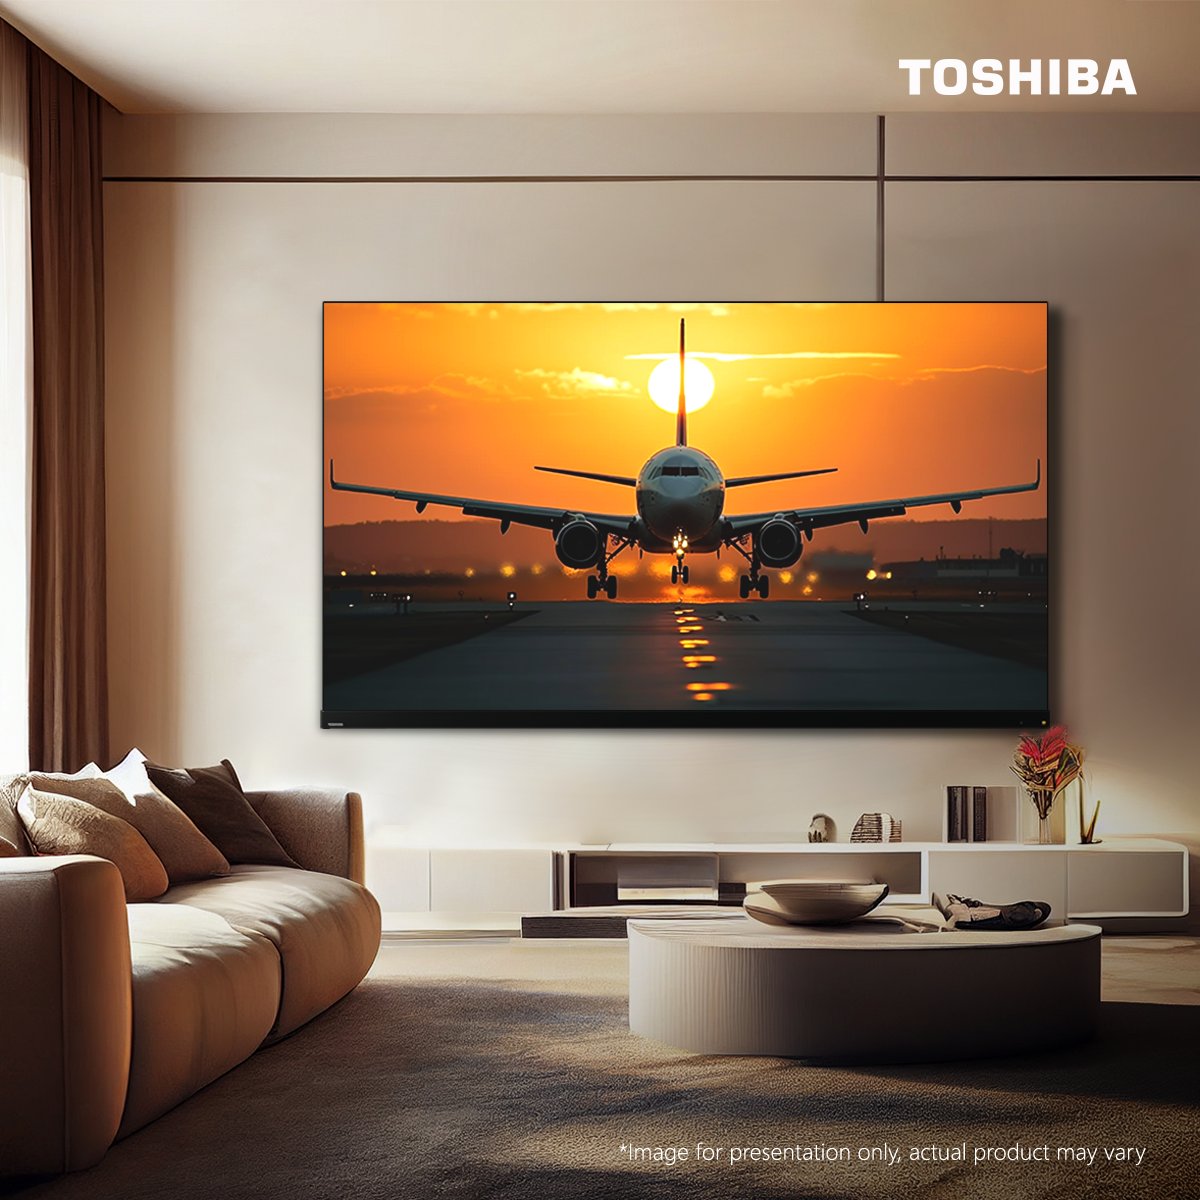 Treat yourself to the wholesome feel of advanced sound with the True Multichannel 3.1.2 sound system that gives a great 3D audio experience.

Also designed with the Tru Screen Sound, your Toshiba TV emits sounds directly from its screen.
#HomeEntertainment #ToshibaTV